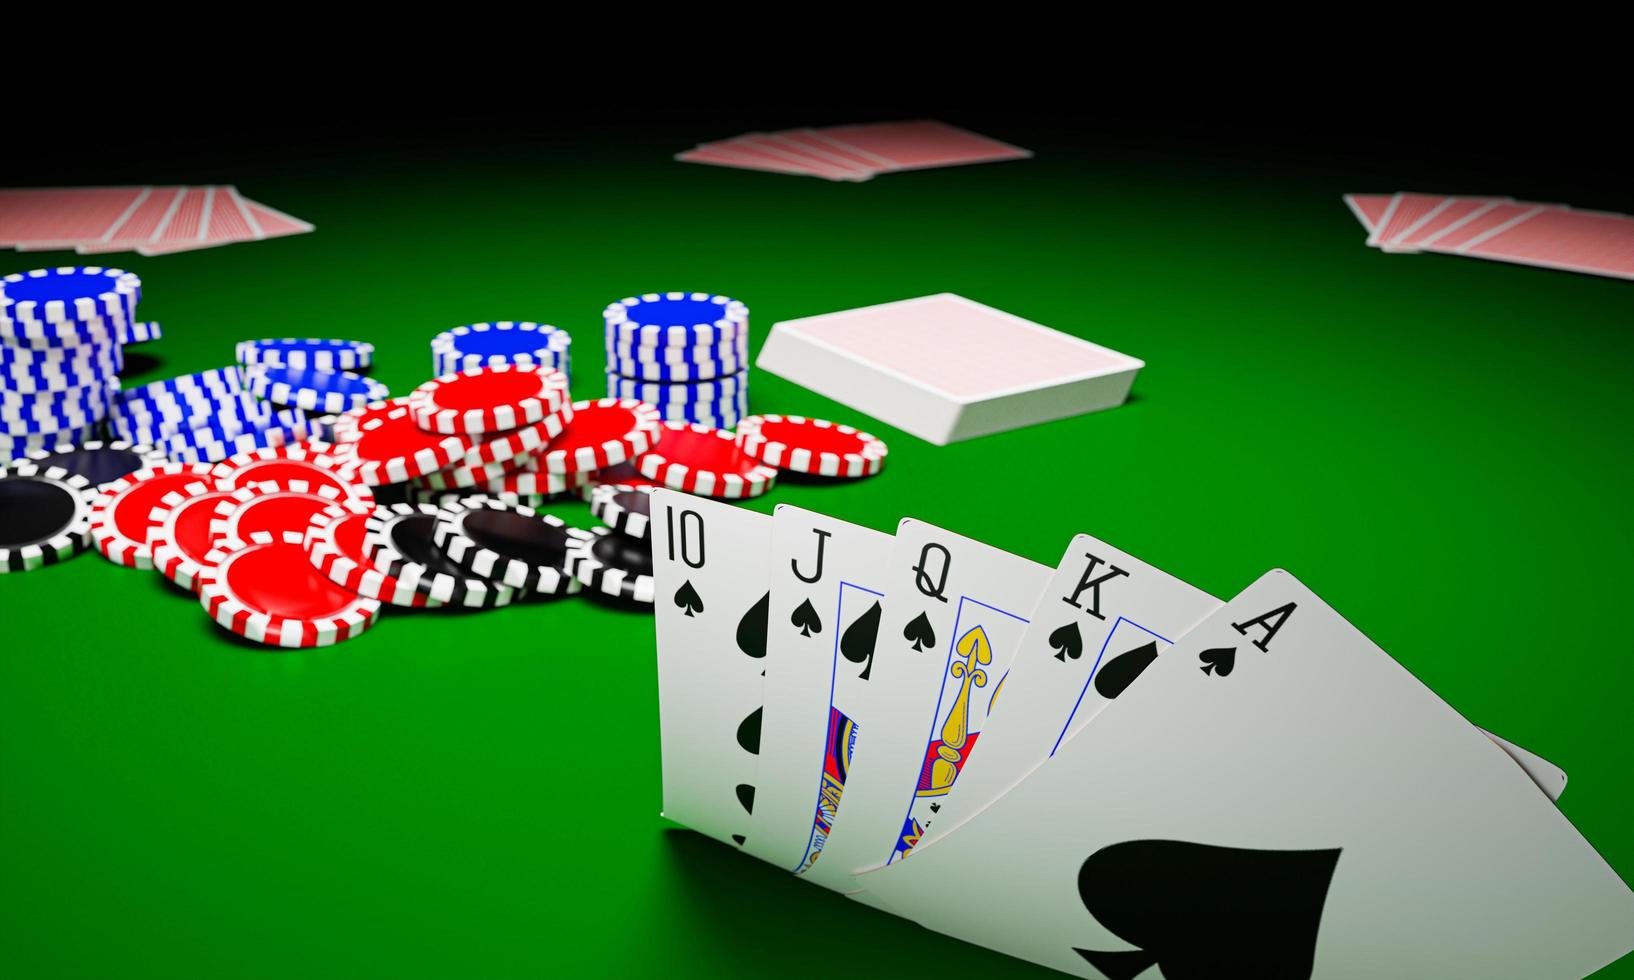 Royal Straight Flush card face In poker gambling in a casino or online gambling Form cards and bet with chips instead of cash. All in with all bets. 3D Rendering photo